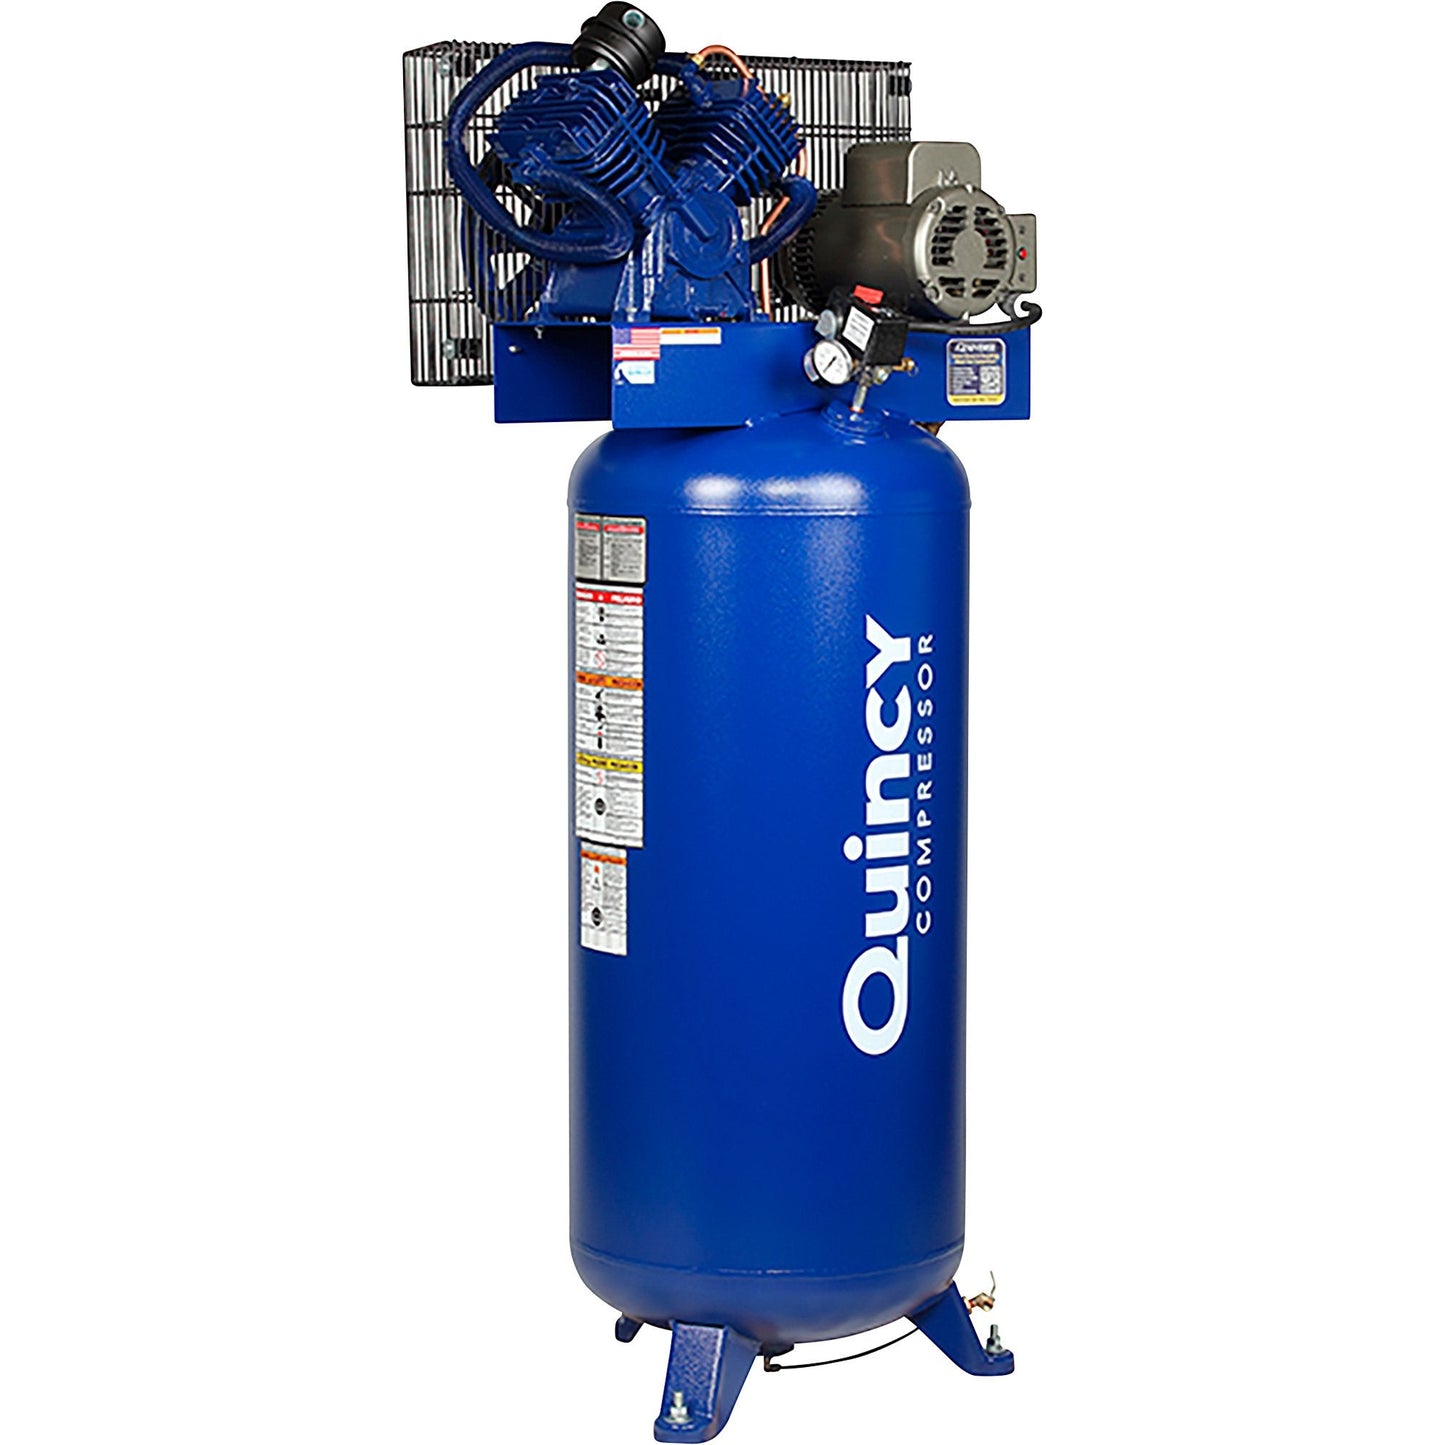 Quincy QT-54 Pro 5-HP 60-Gallon Two-Stage Air Compressor (230V 1-Phase)